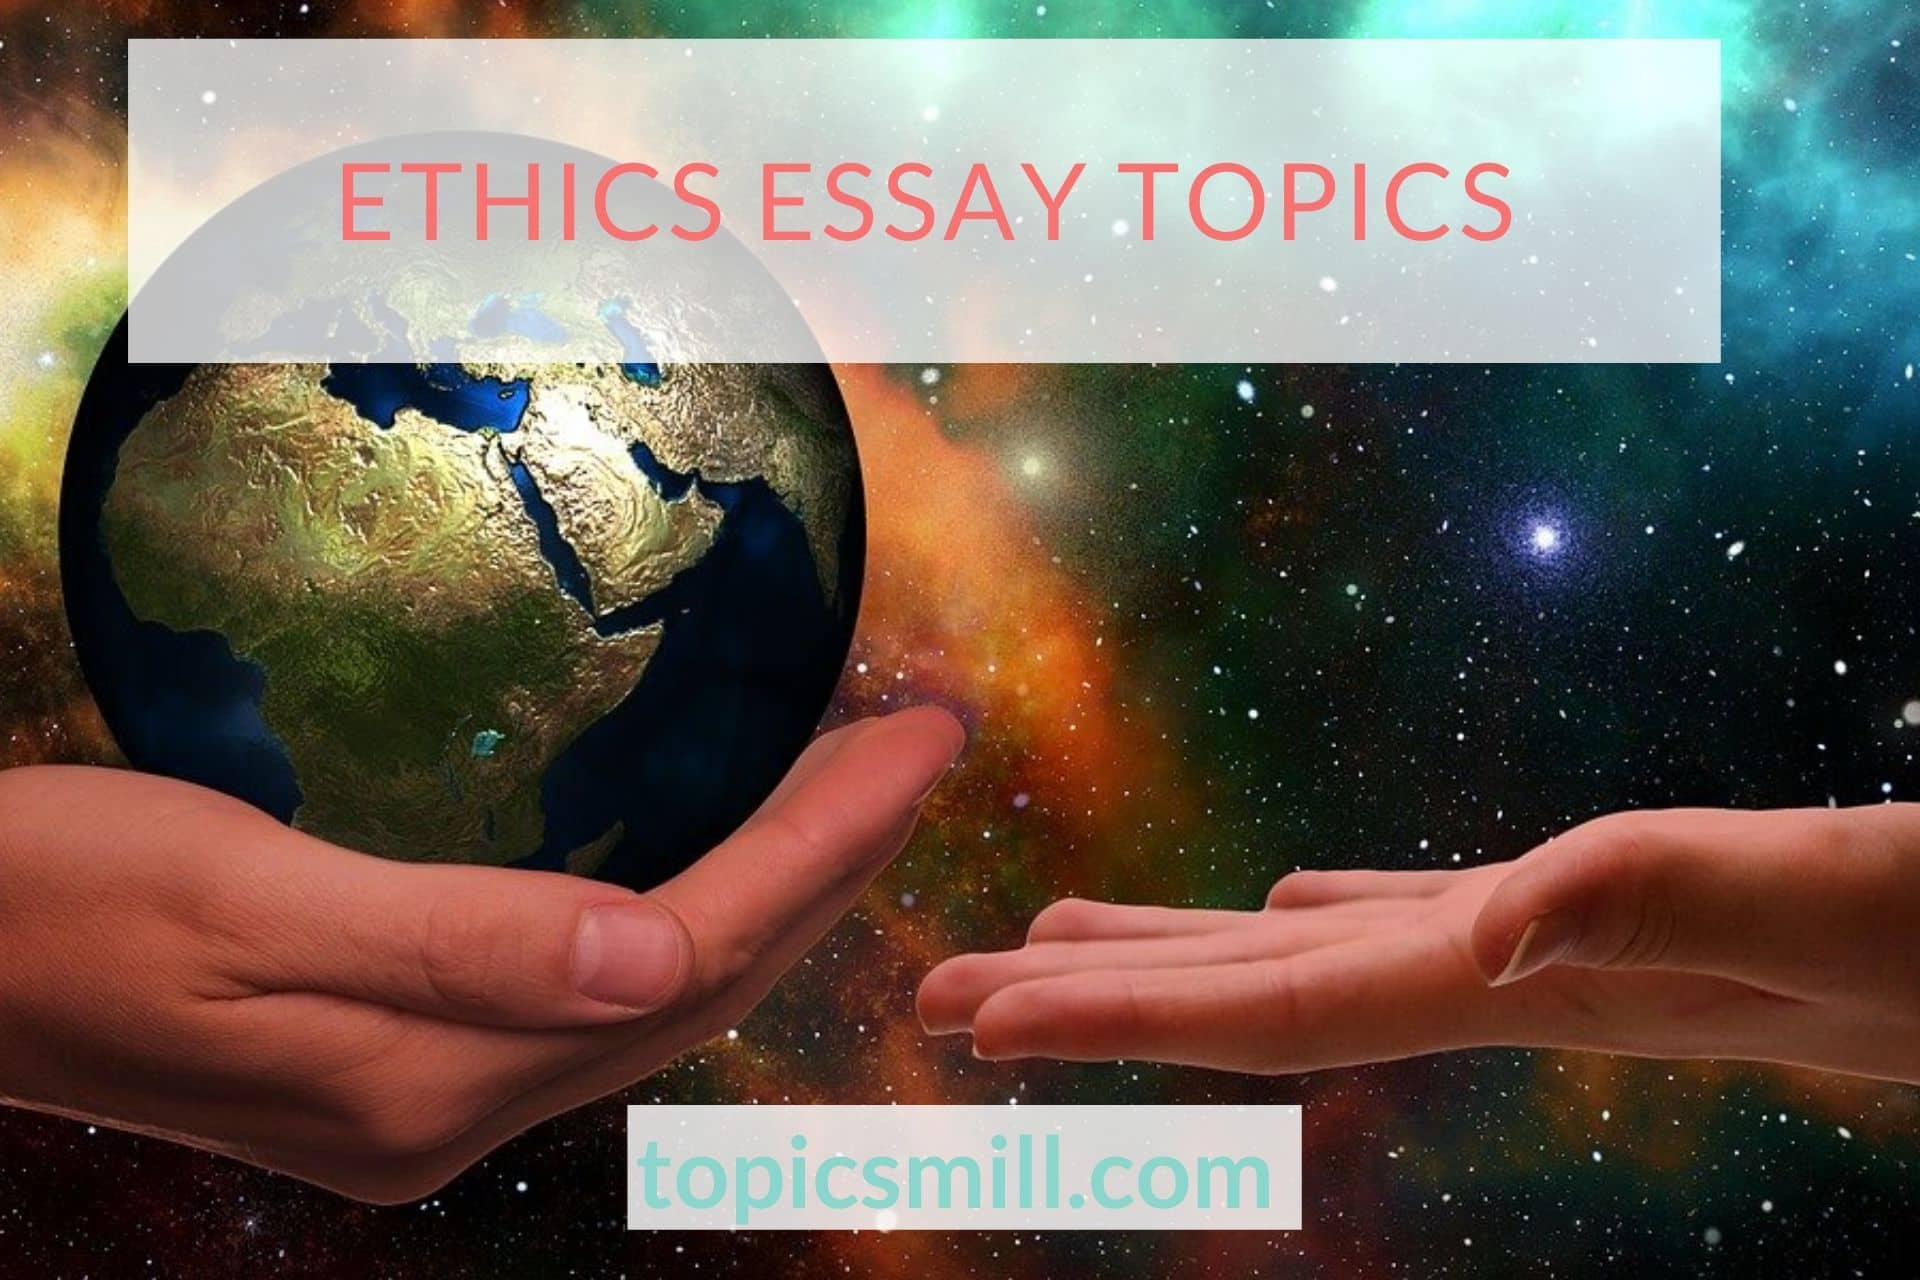 Ethics in the news essay